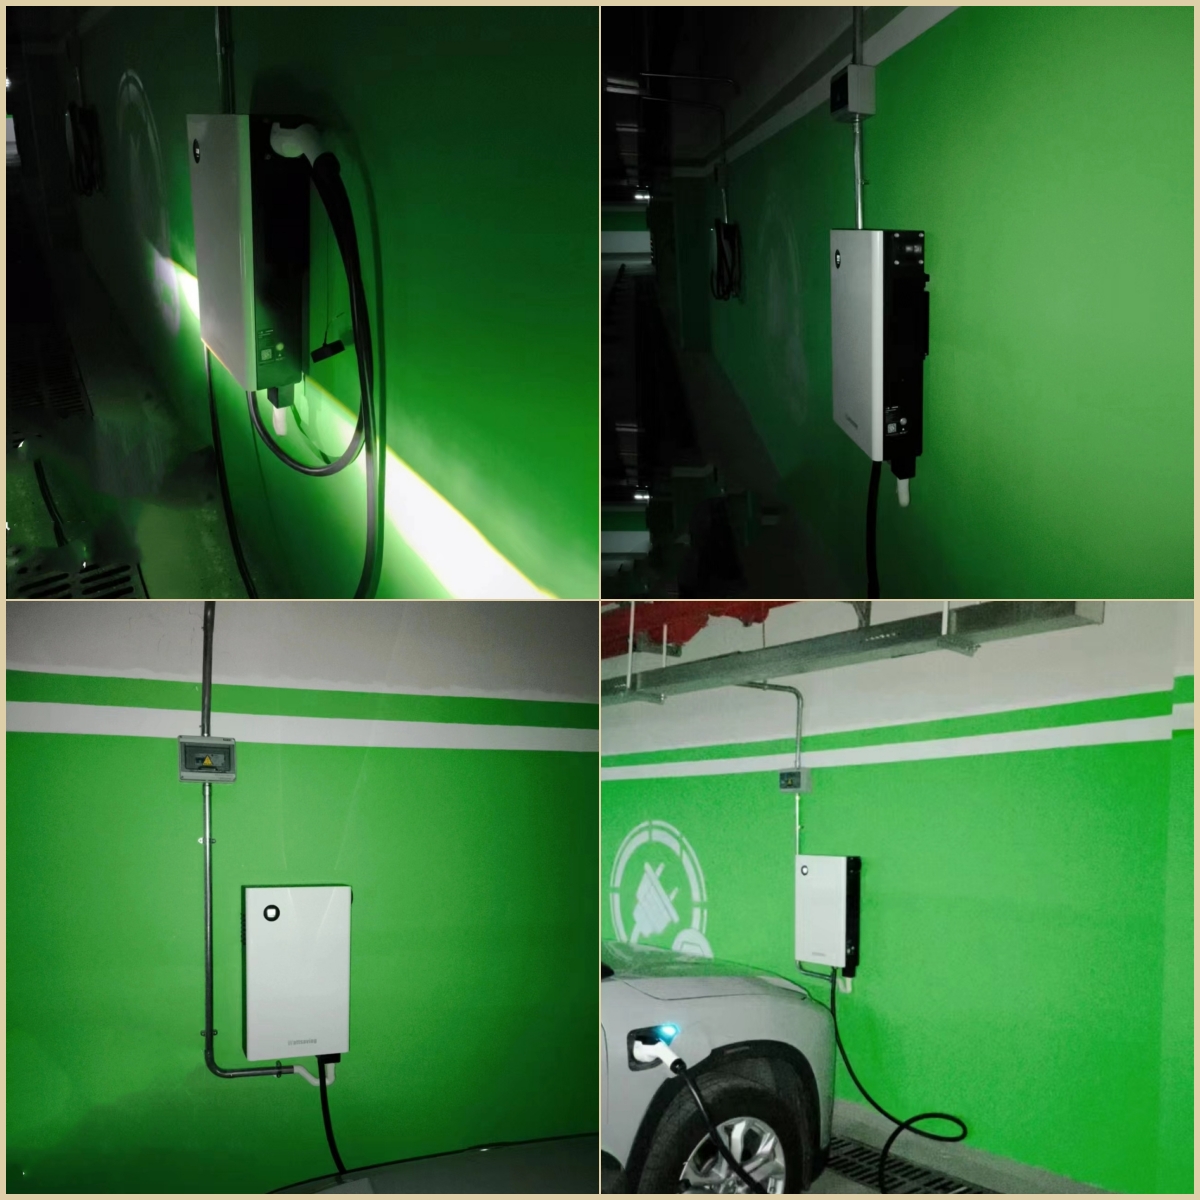 #evchargerinstall
#evchargerinstallation
#evchargerstation
#chargingstation
#evchargerfactory